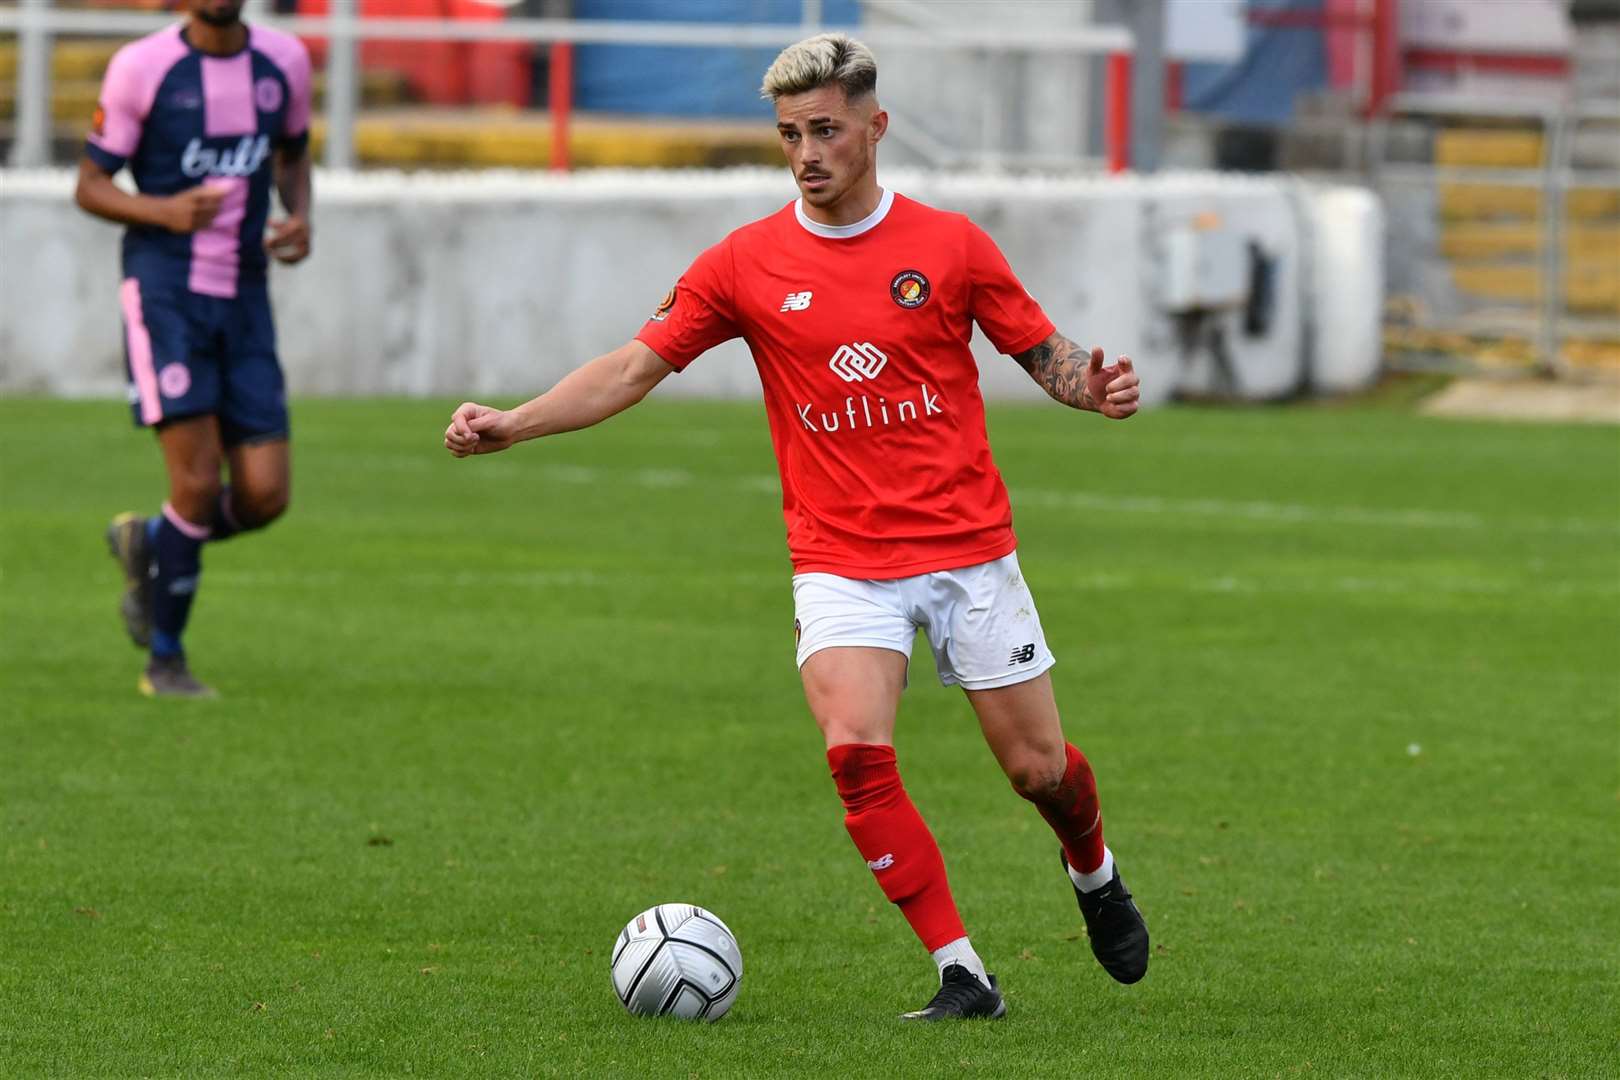 Jack Paxman was named Ebbsfleet United supporters' player-of-the-year for 2020/21 Picture: Keith Gillard